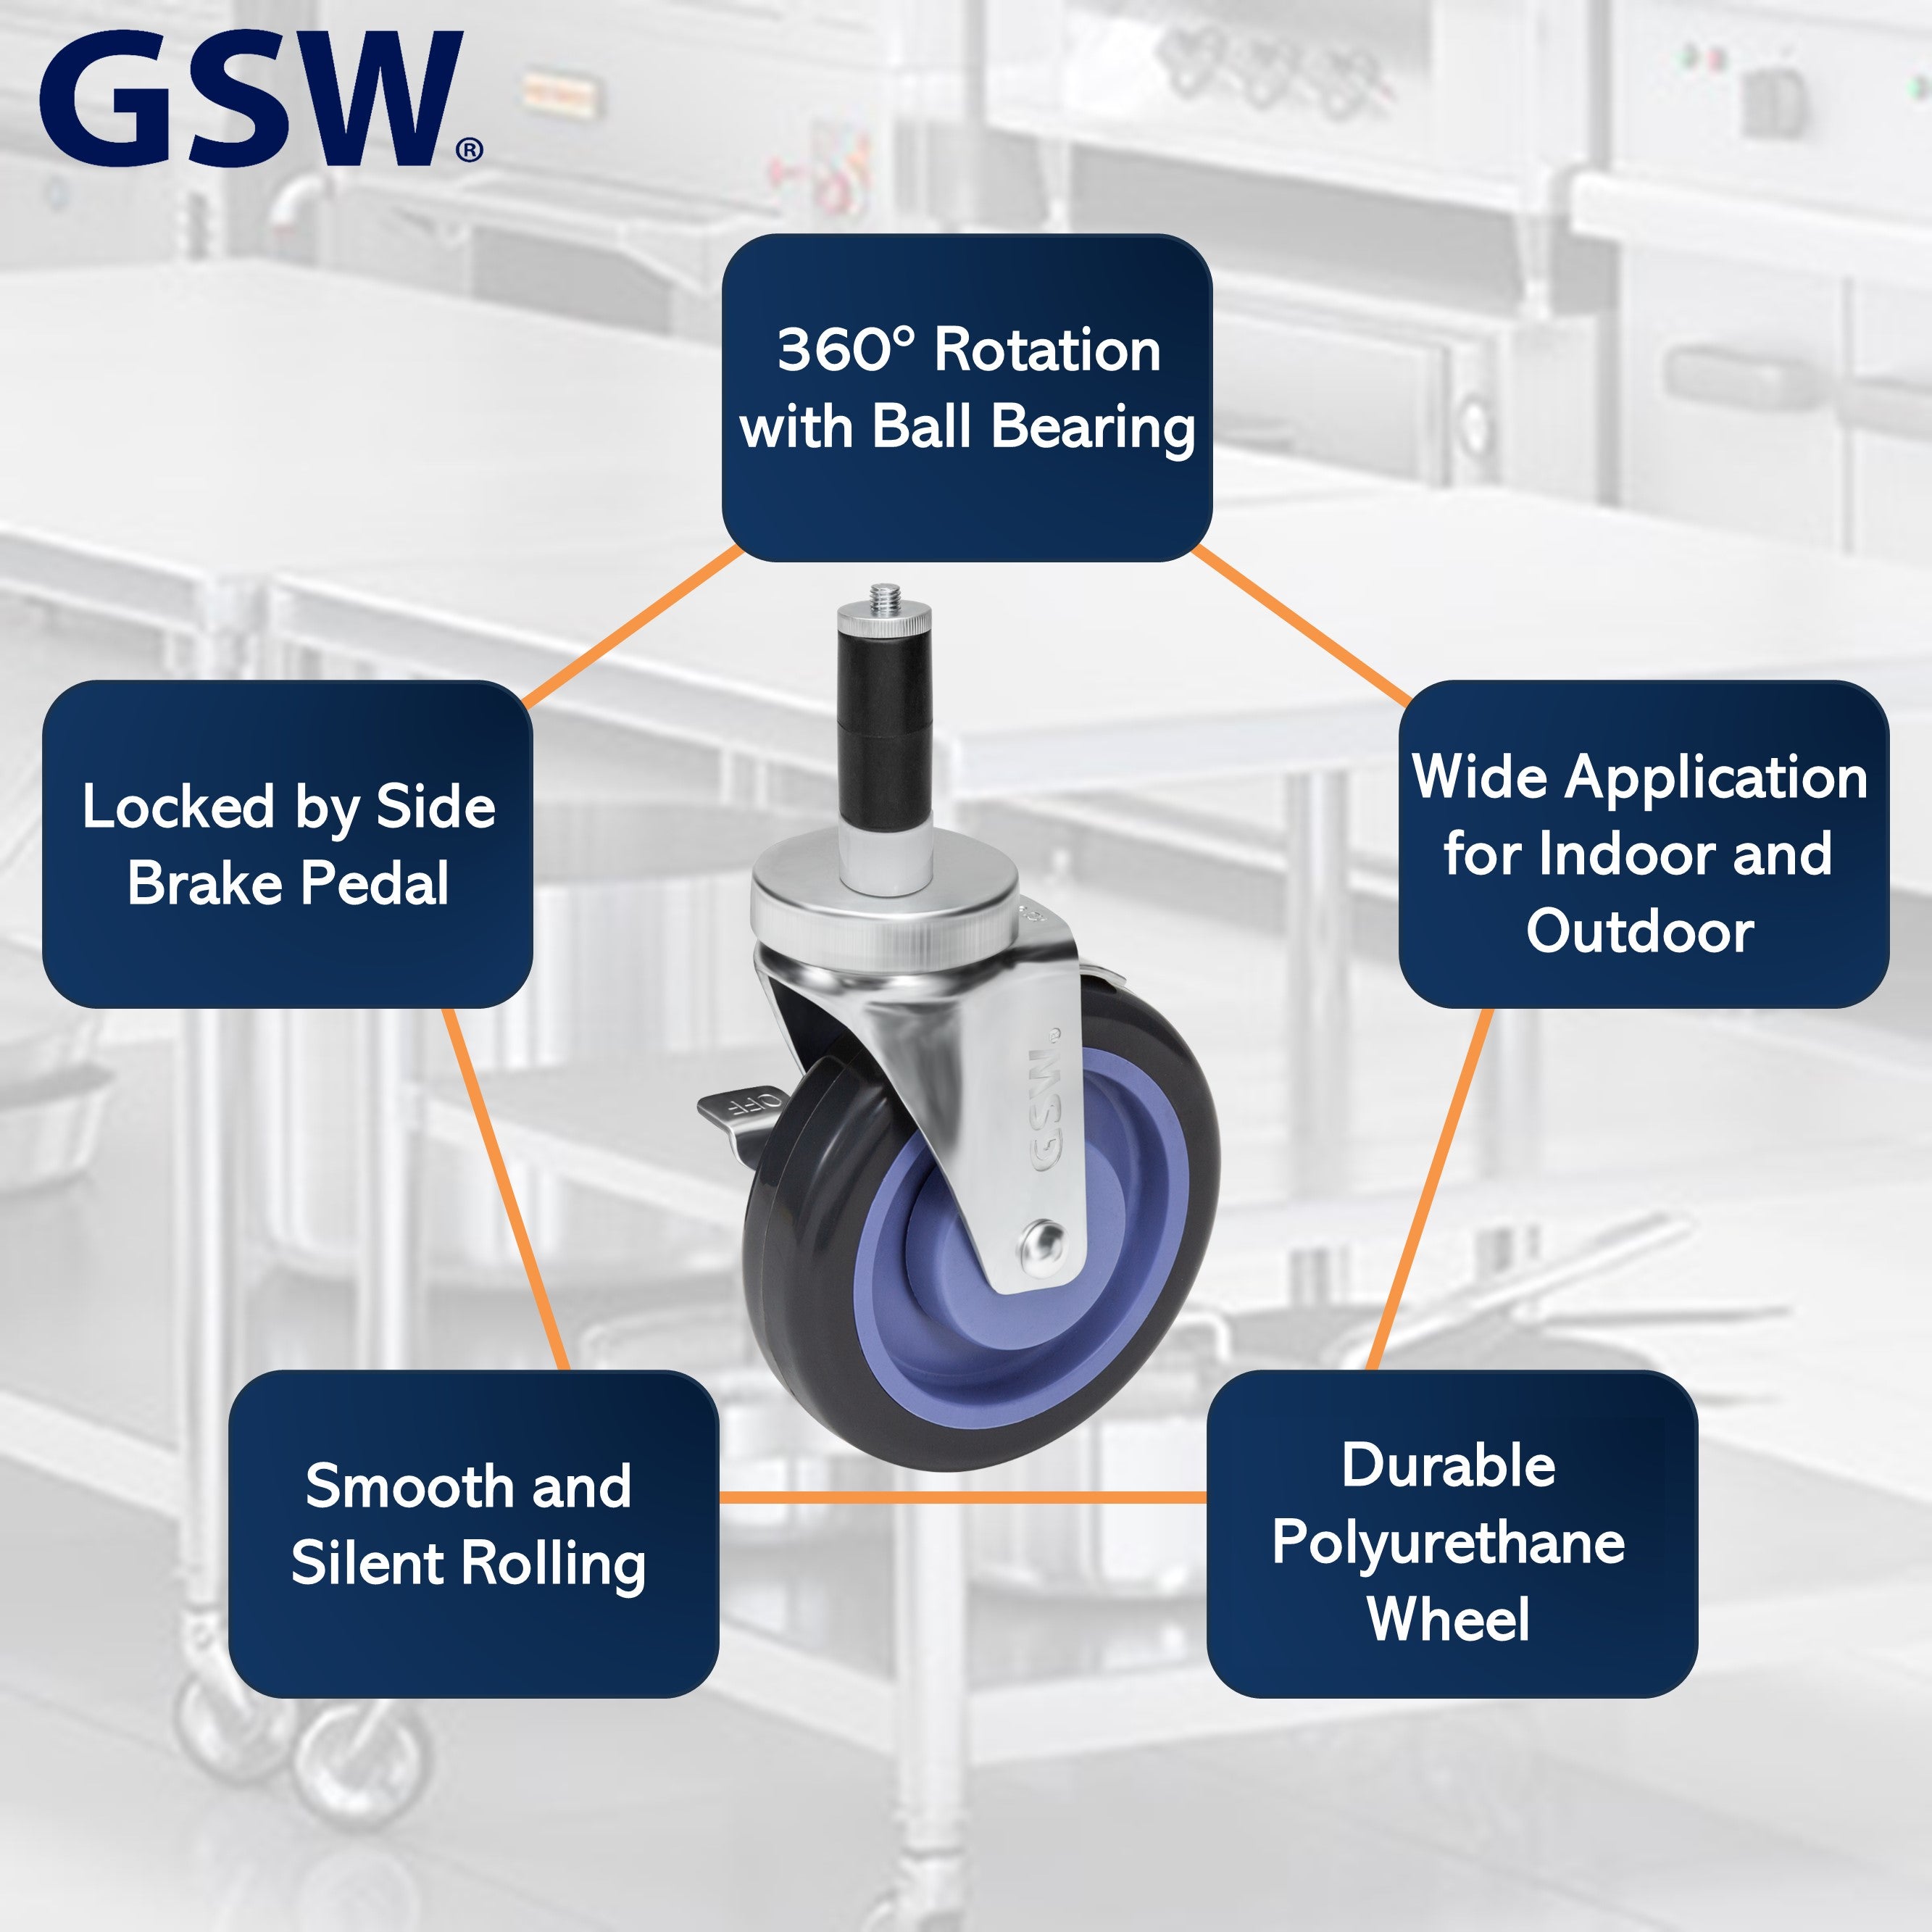 GSW 5" Heavy Duty Casters Wheels with Expanding Stem - Loading Capacity: 1480 lbs. Use for Wire Shelvings, Storage Racks, Residential, Warehouses (Swivel with Brake)